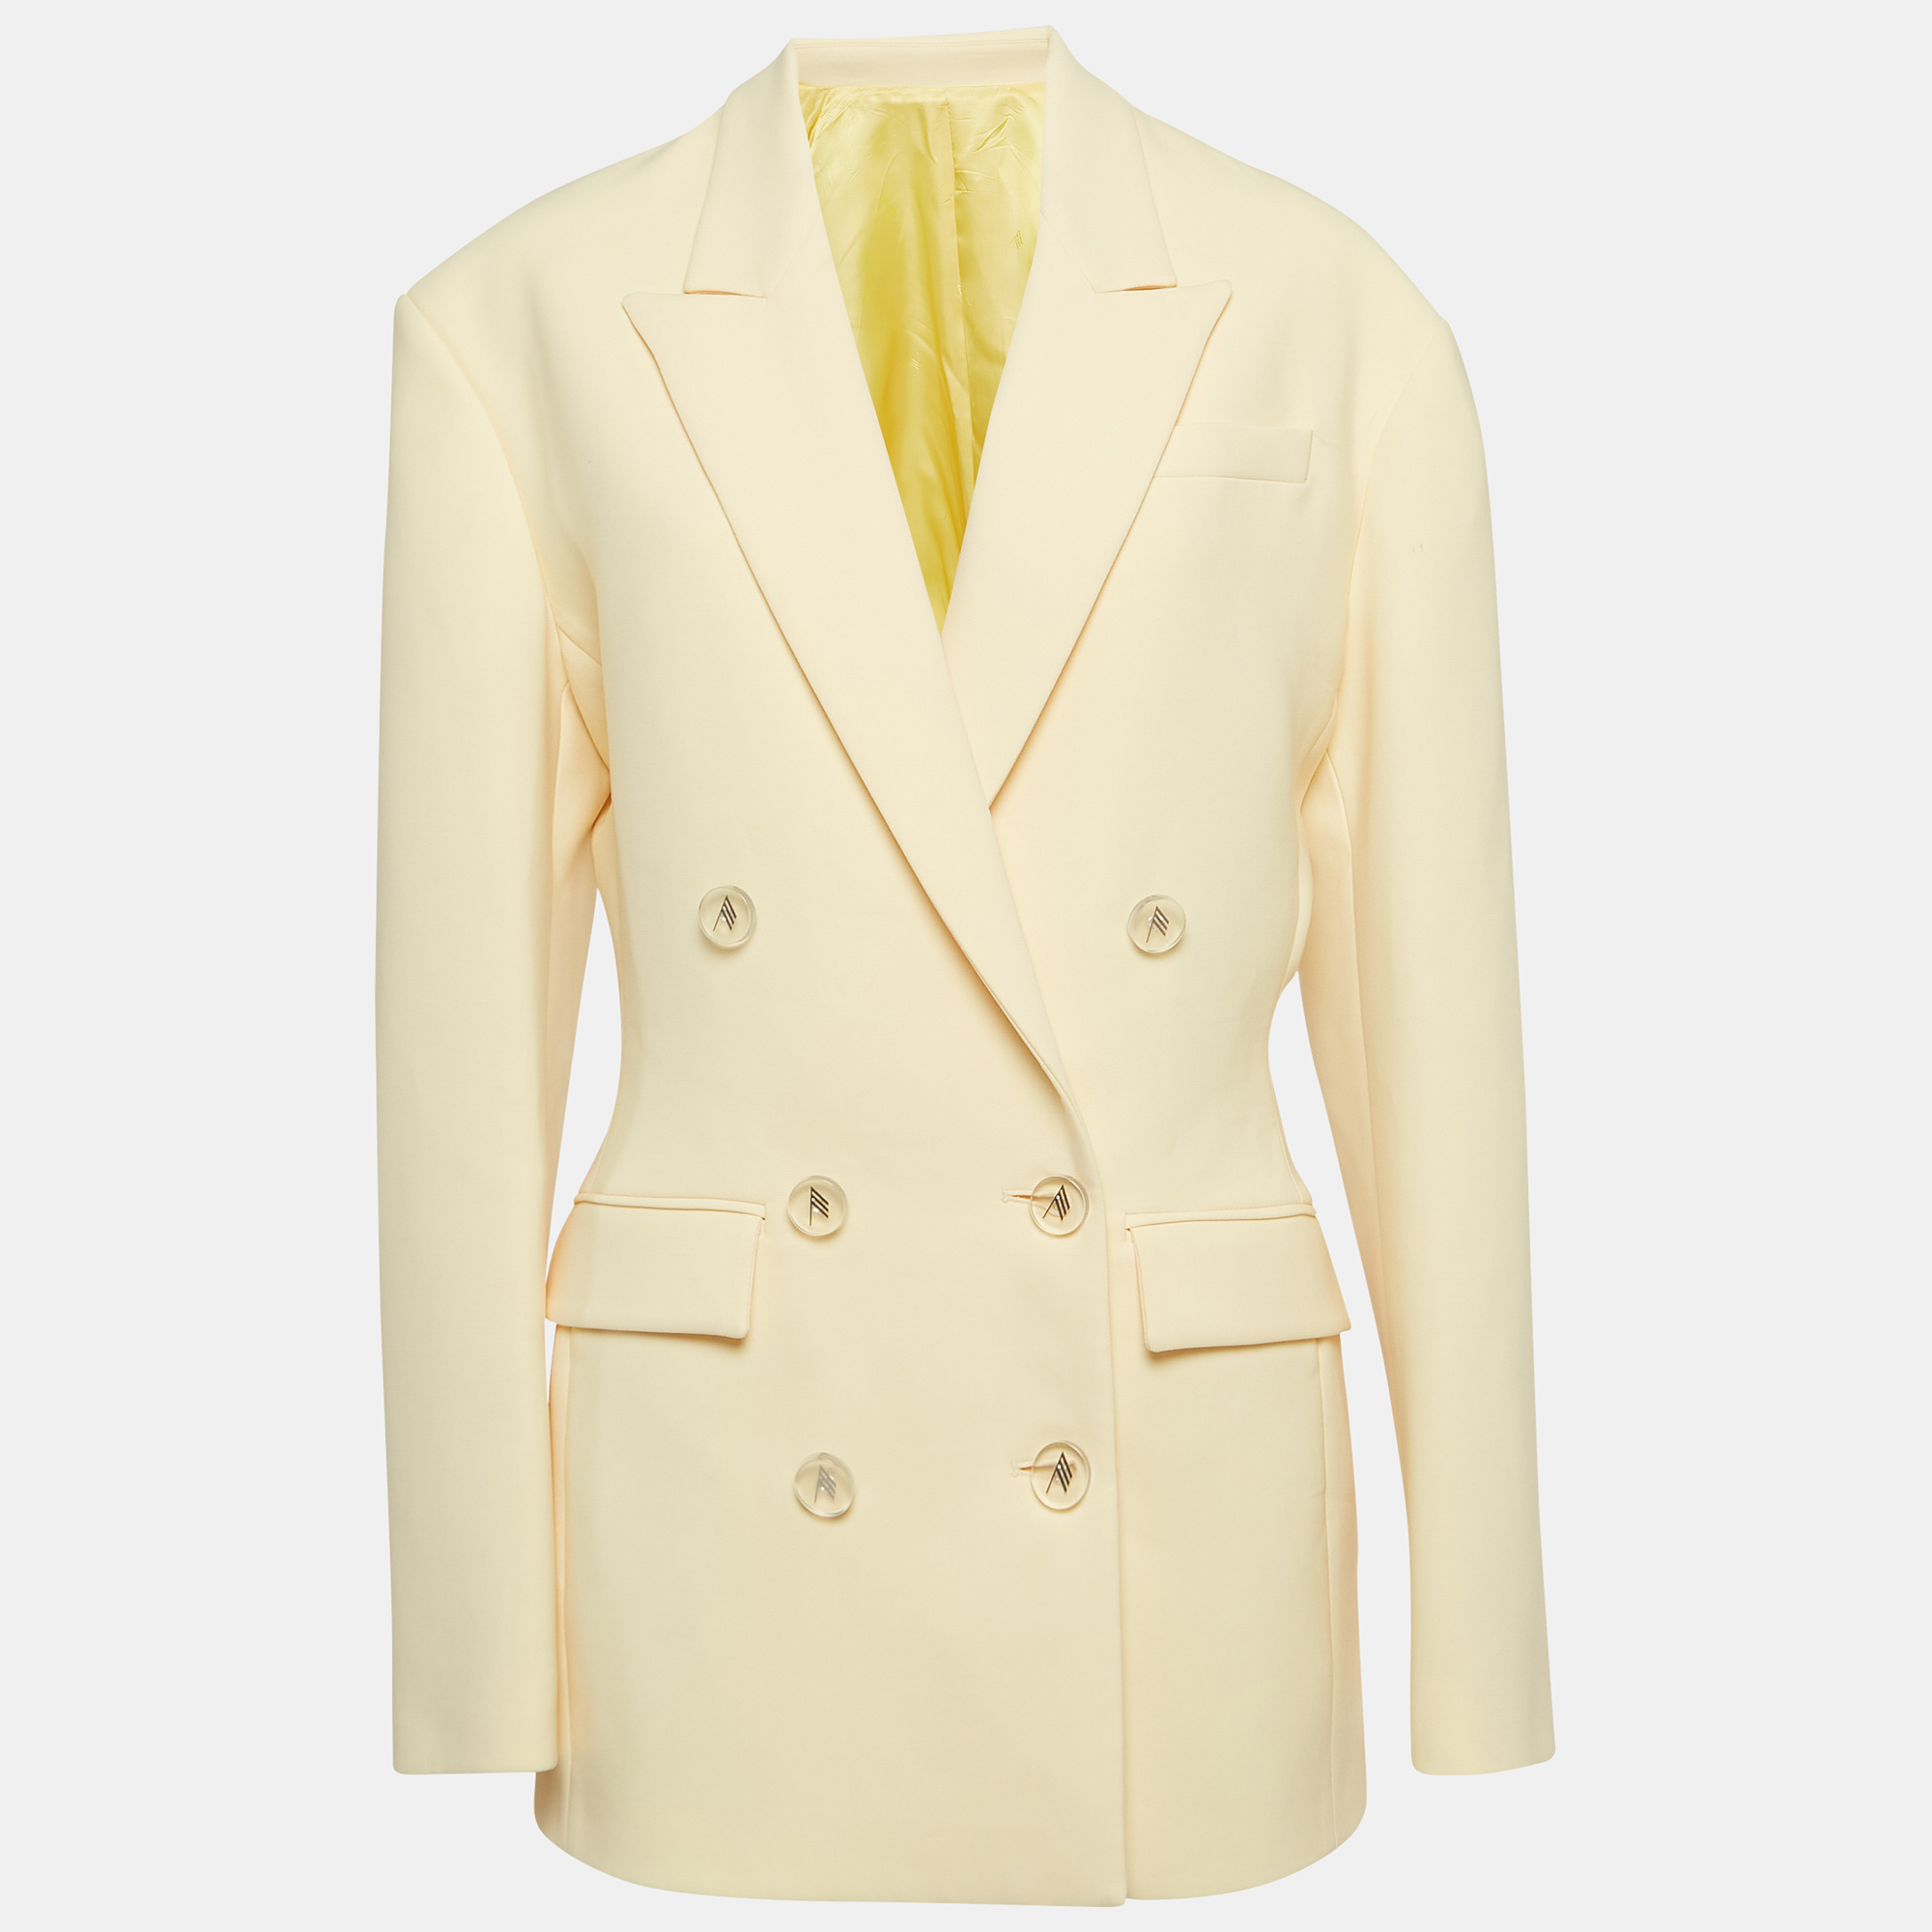 

The Attico Pastel Yellow Stretch Knit Double Breasted April Blazer